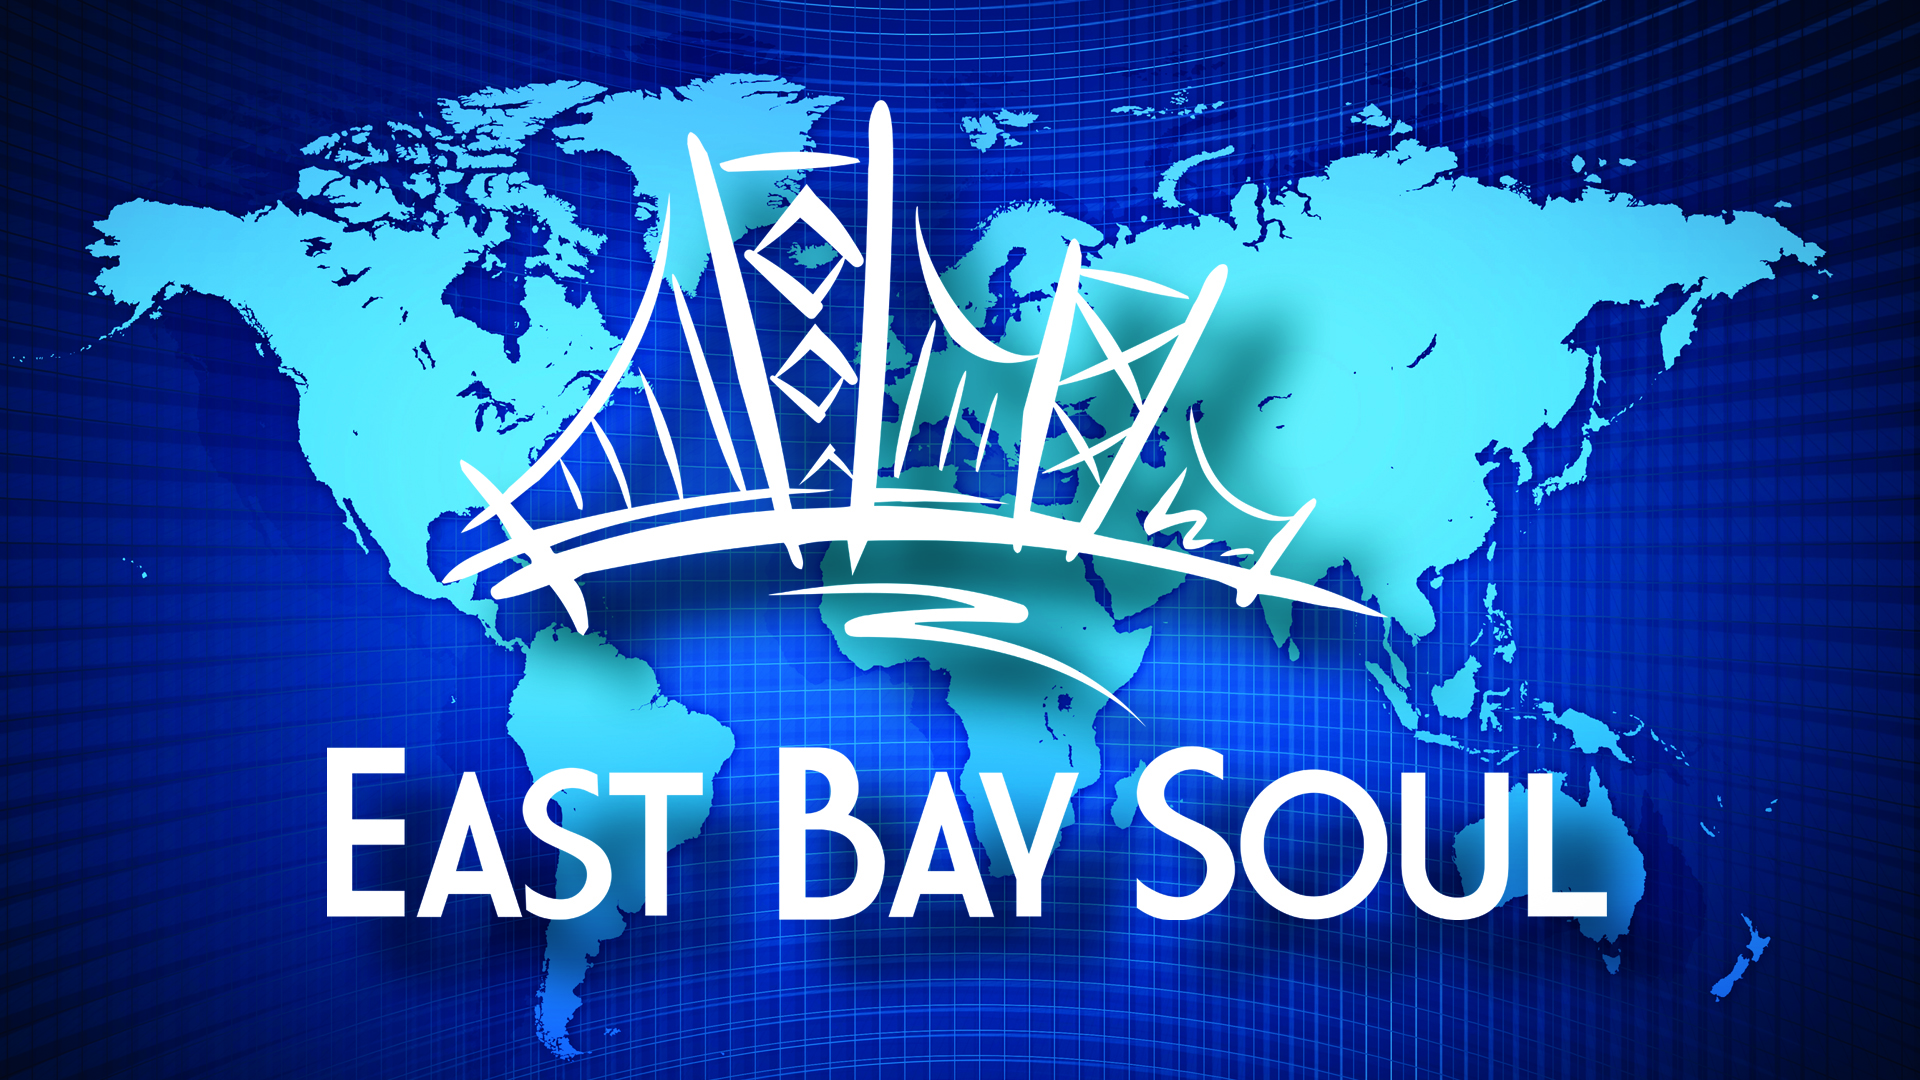 East Bay Soul is a blend of Funk Jazz, R&B and Soul. The combined musical pedigree of East Bay Soul reads like a who’s who’s in pop culture.